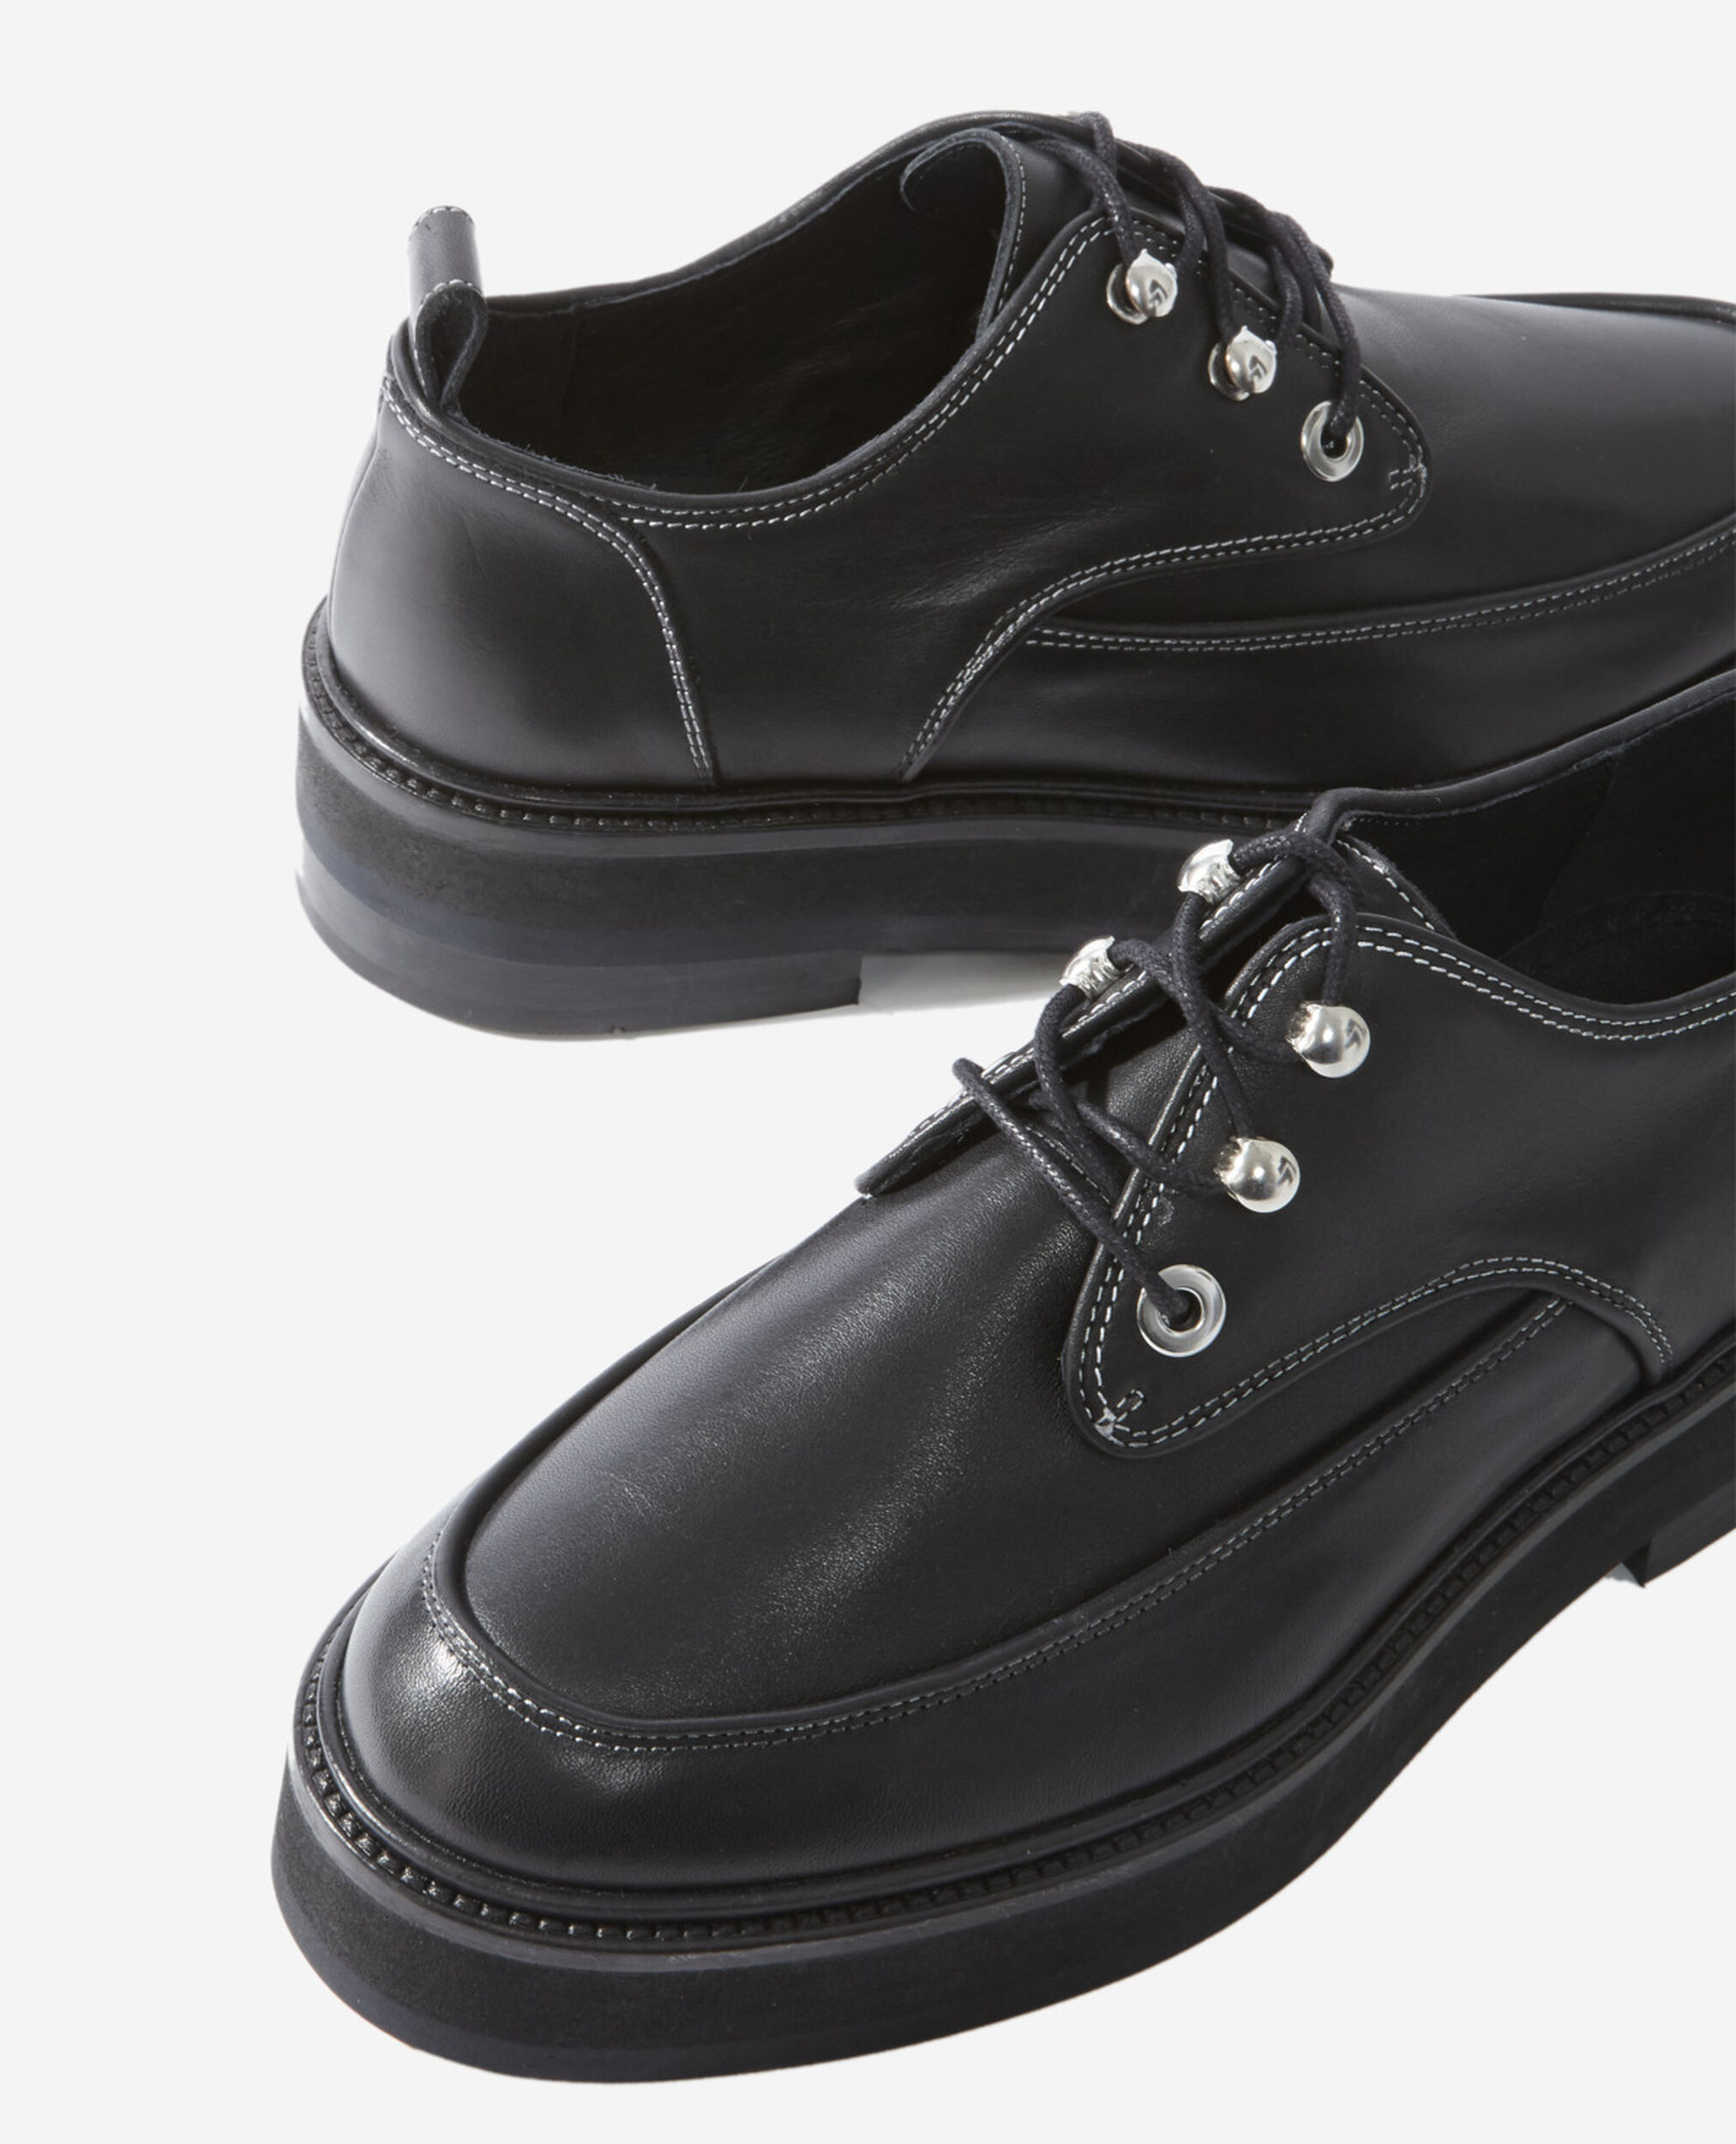 Black leather derbies with topstitching, BLACK, hi-res image number null